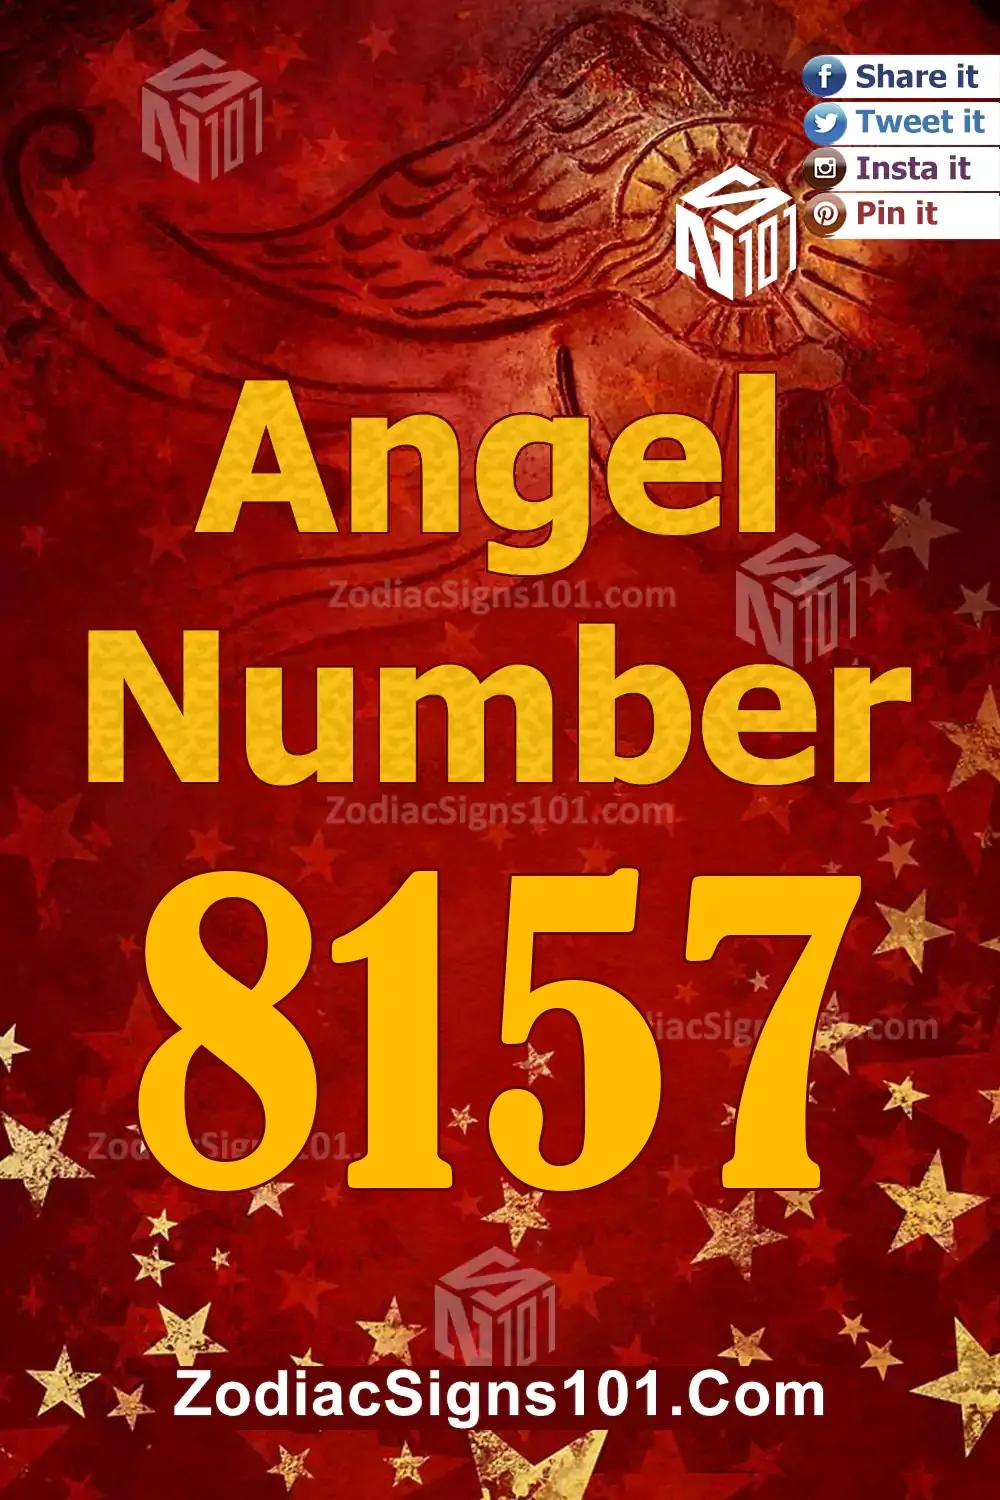 8157 Angel Number Meaning